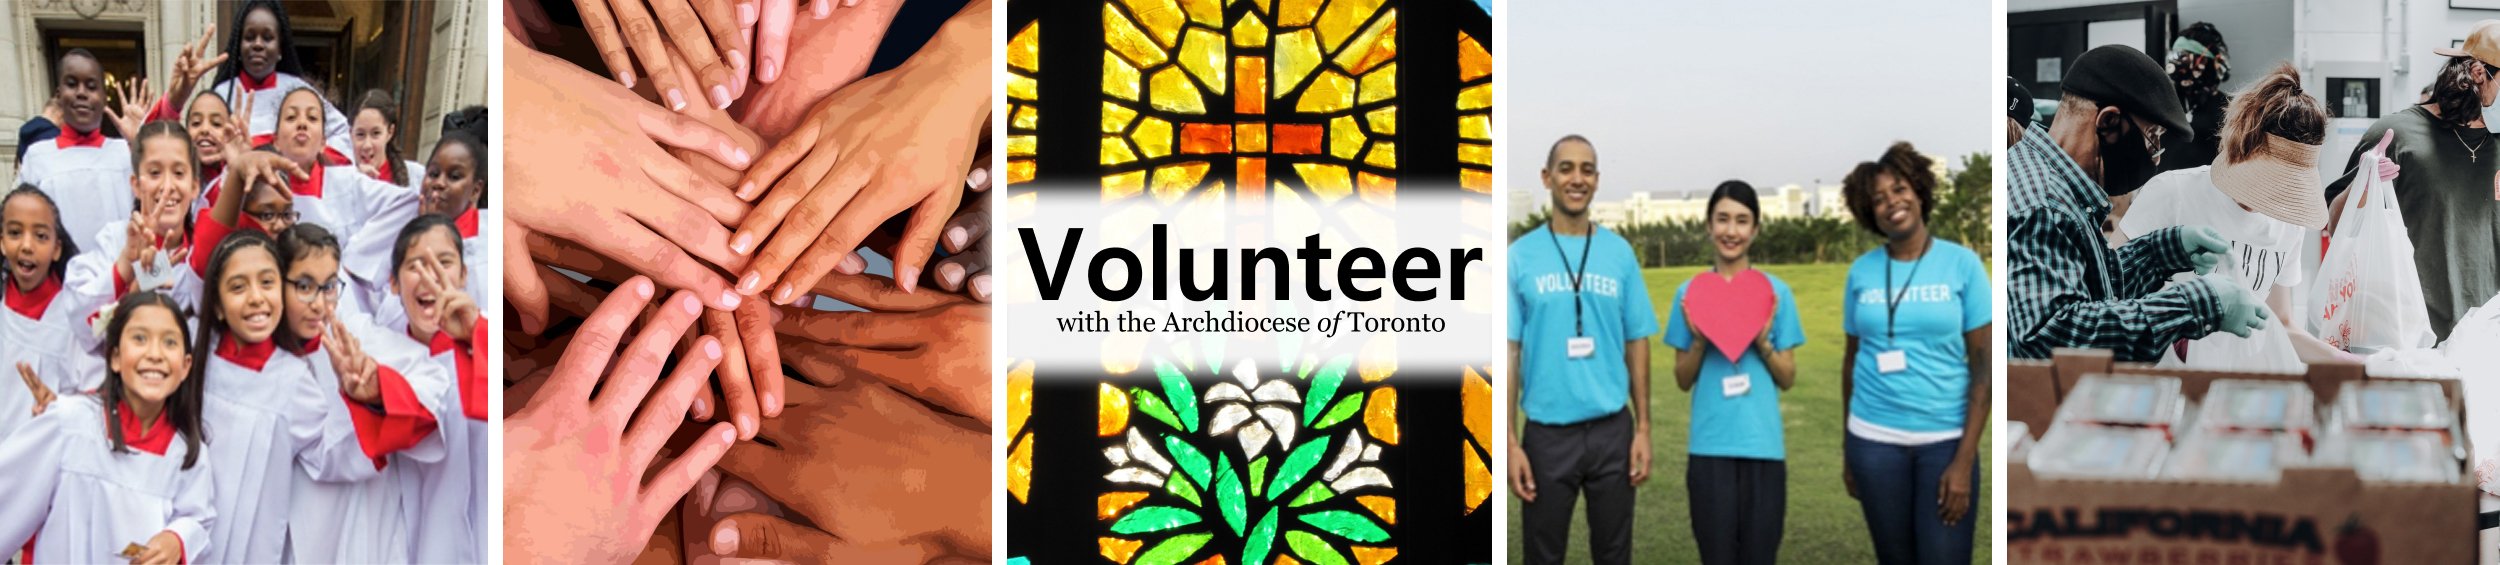 Banner with text reading "Volunteer with the Archdiocese of Toronto" along with photos of volunteers